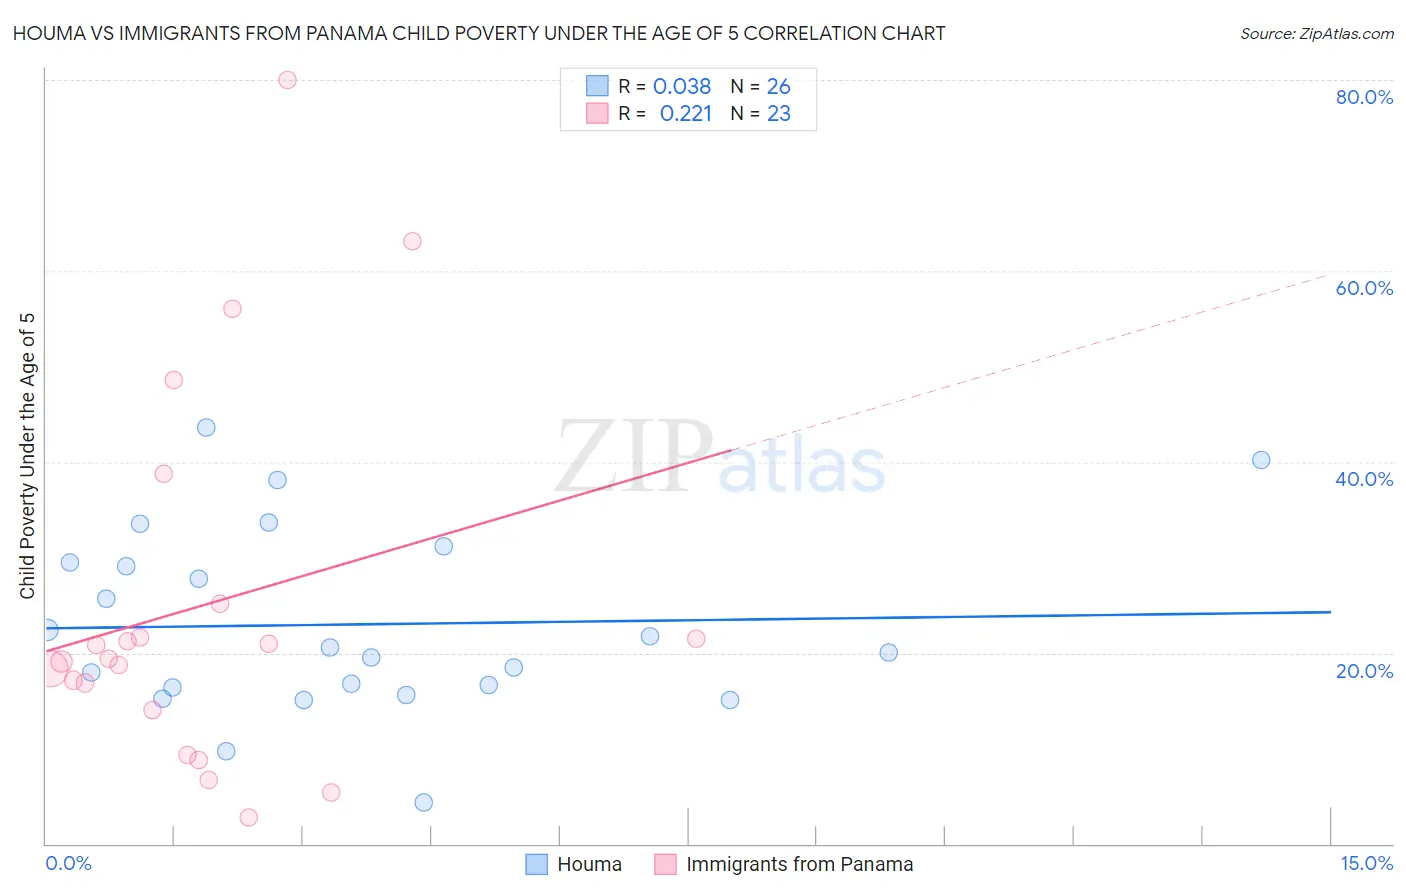 Houma vs Immigrants from Panama Child Poverty Under the Age of 5